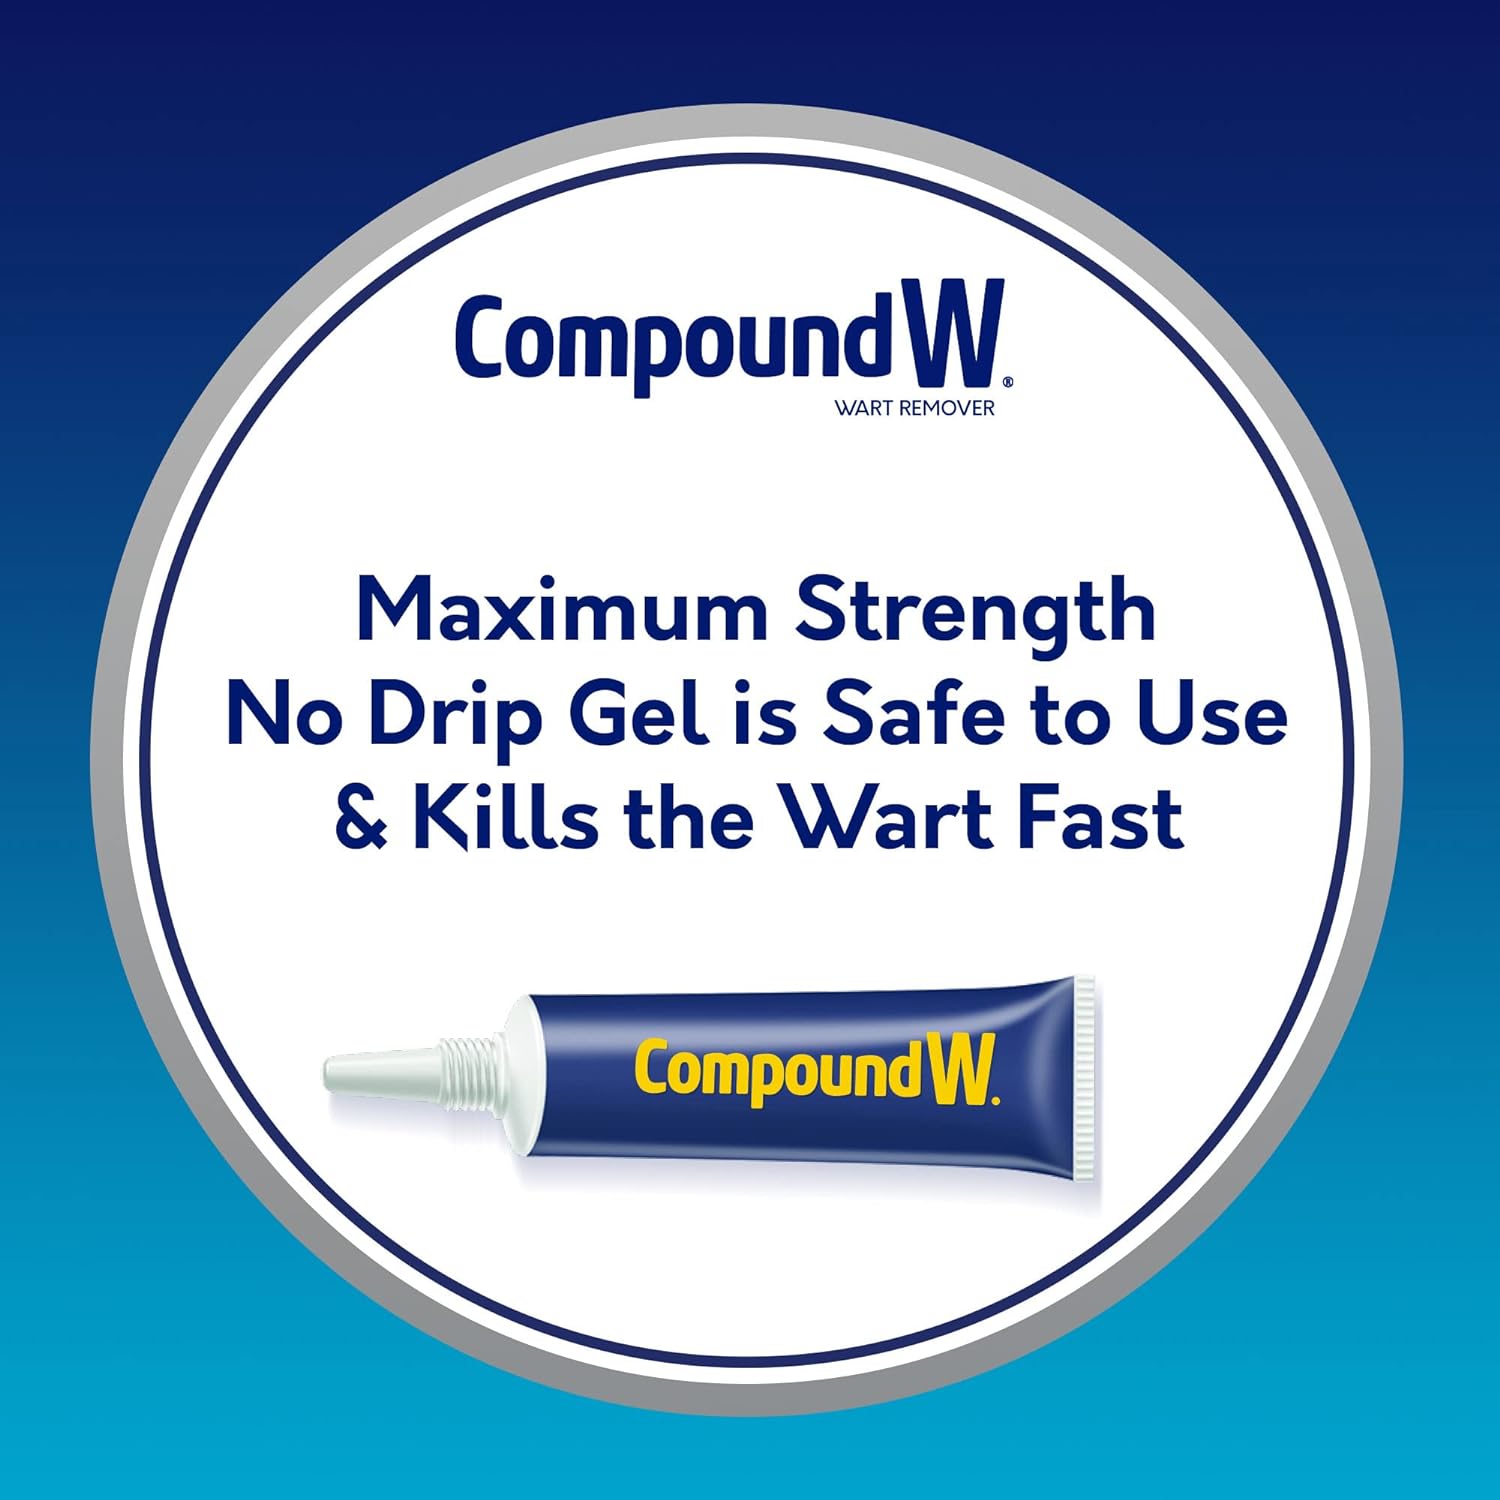 Compound W Total Care Wart Remover with Proheal Cream for Skin - 0.25 oz and Maximum Strength Fast Acting Salicylic Acid Gel - 0.25 oz